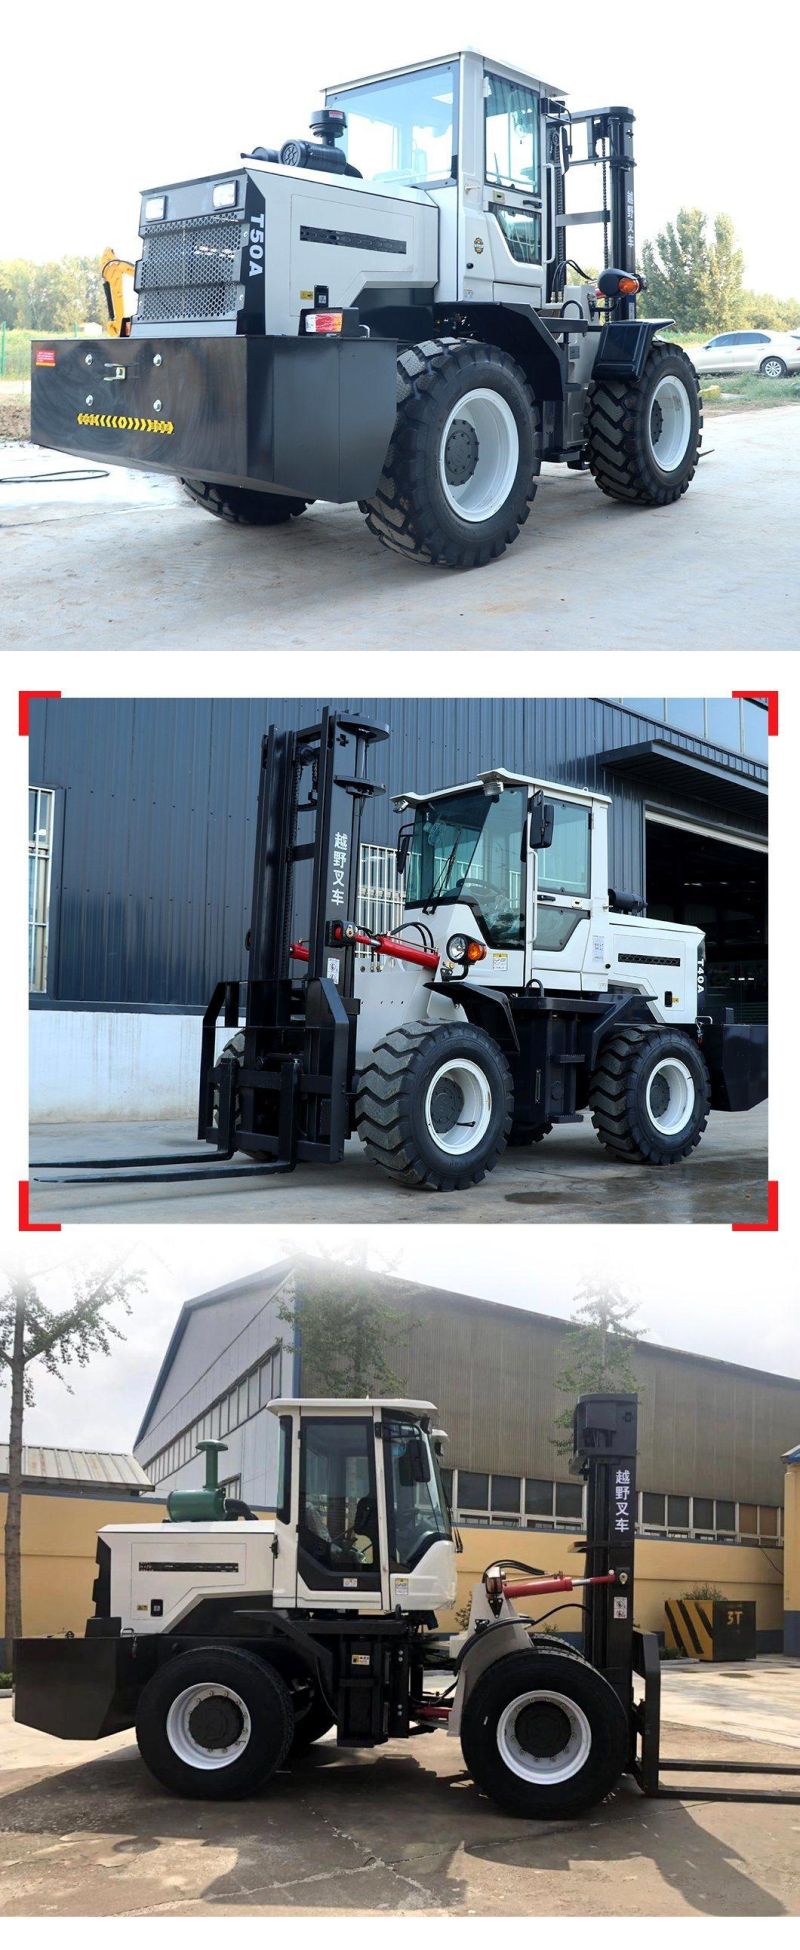 Discount-Price Chinese Diesel Cross-Country Forklift for Sale in Europe Hot Sale 5 Ton Forklift Truck